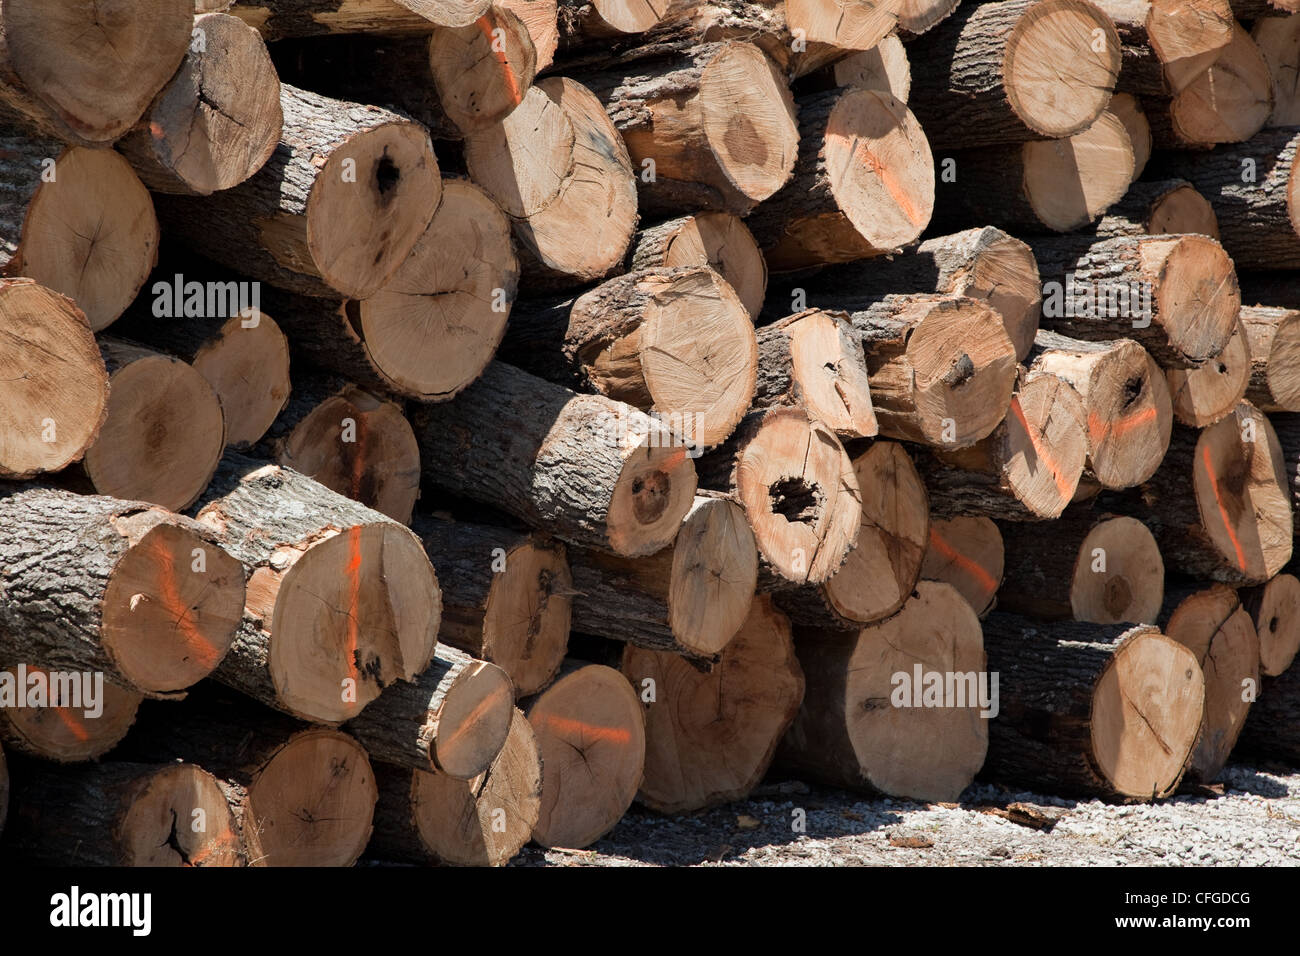 A large stack of freshly cut logs Stock Photo